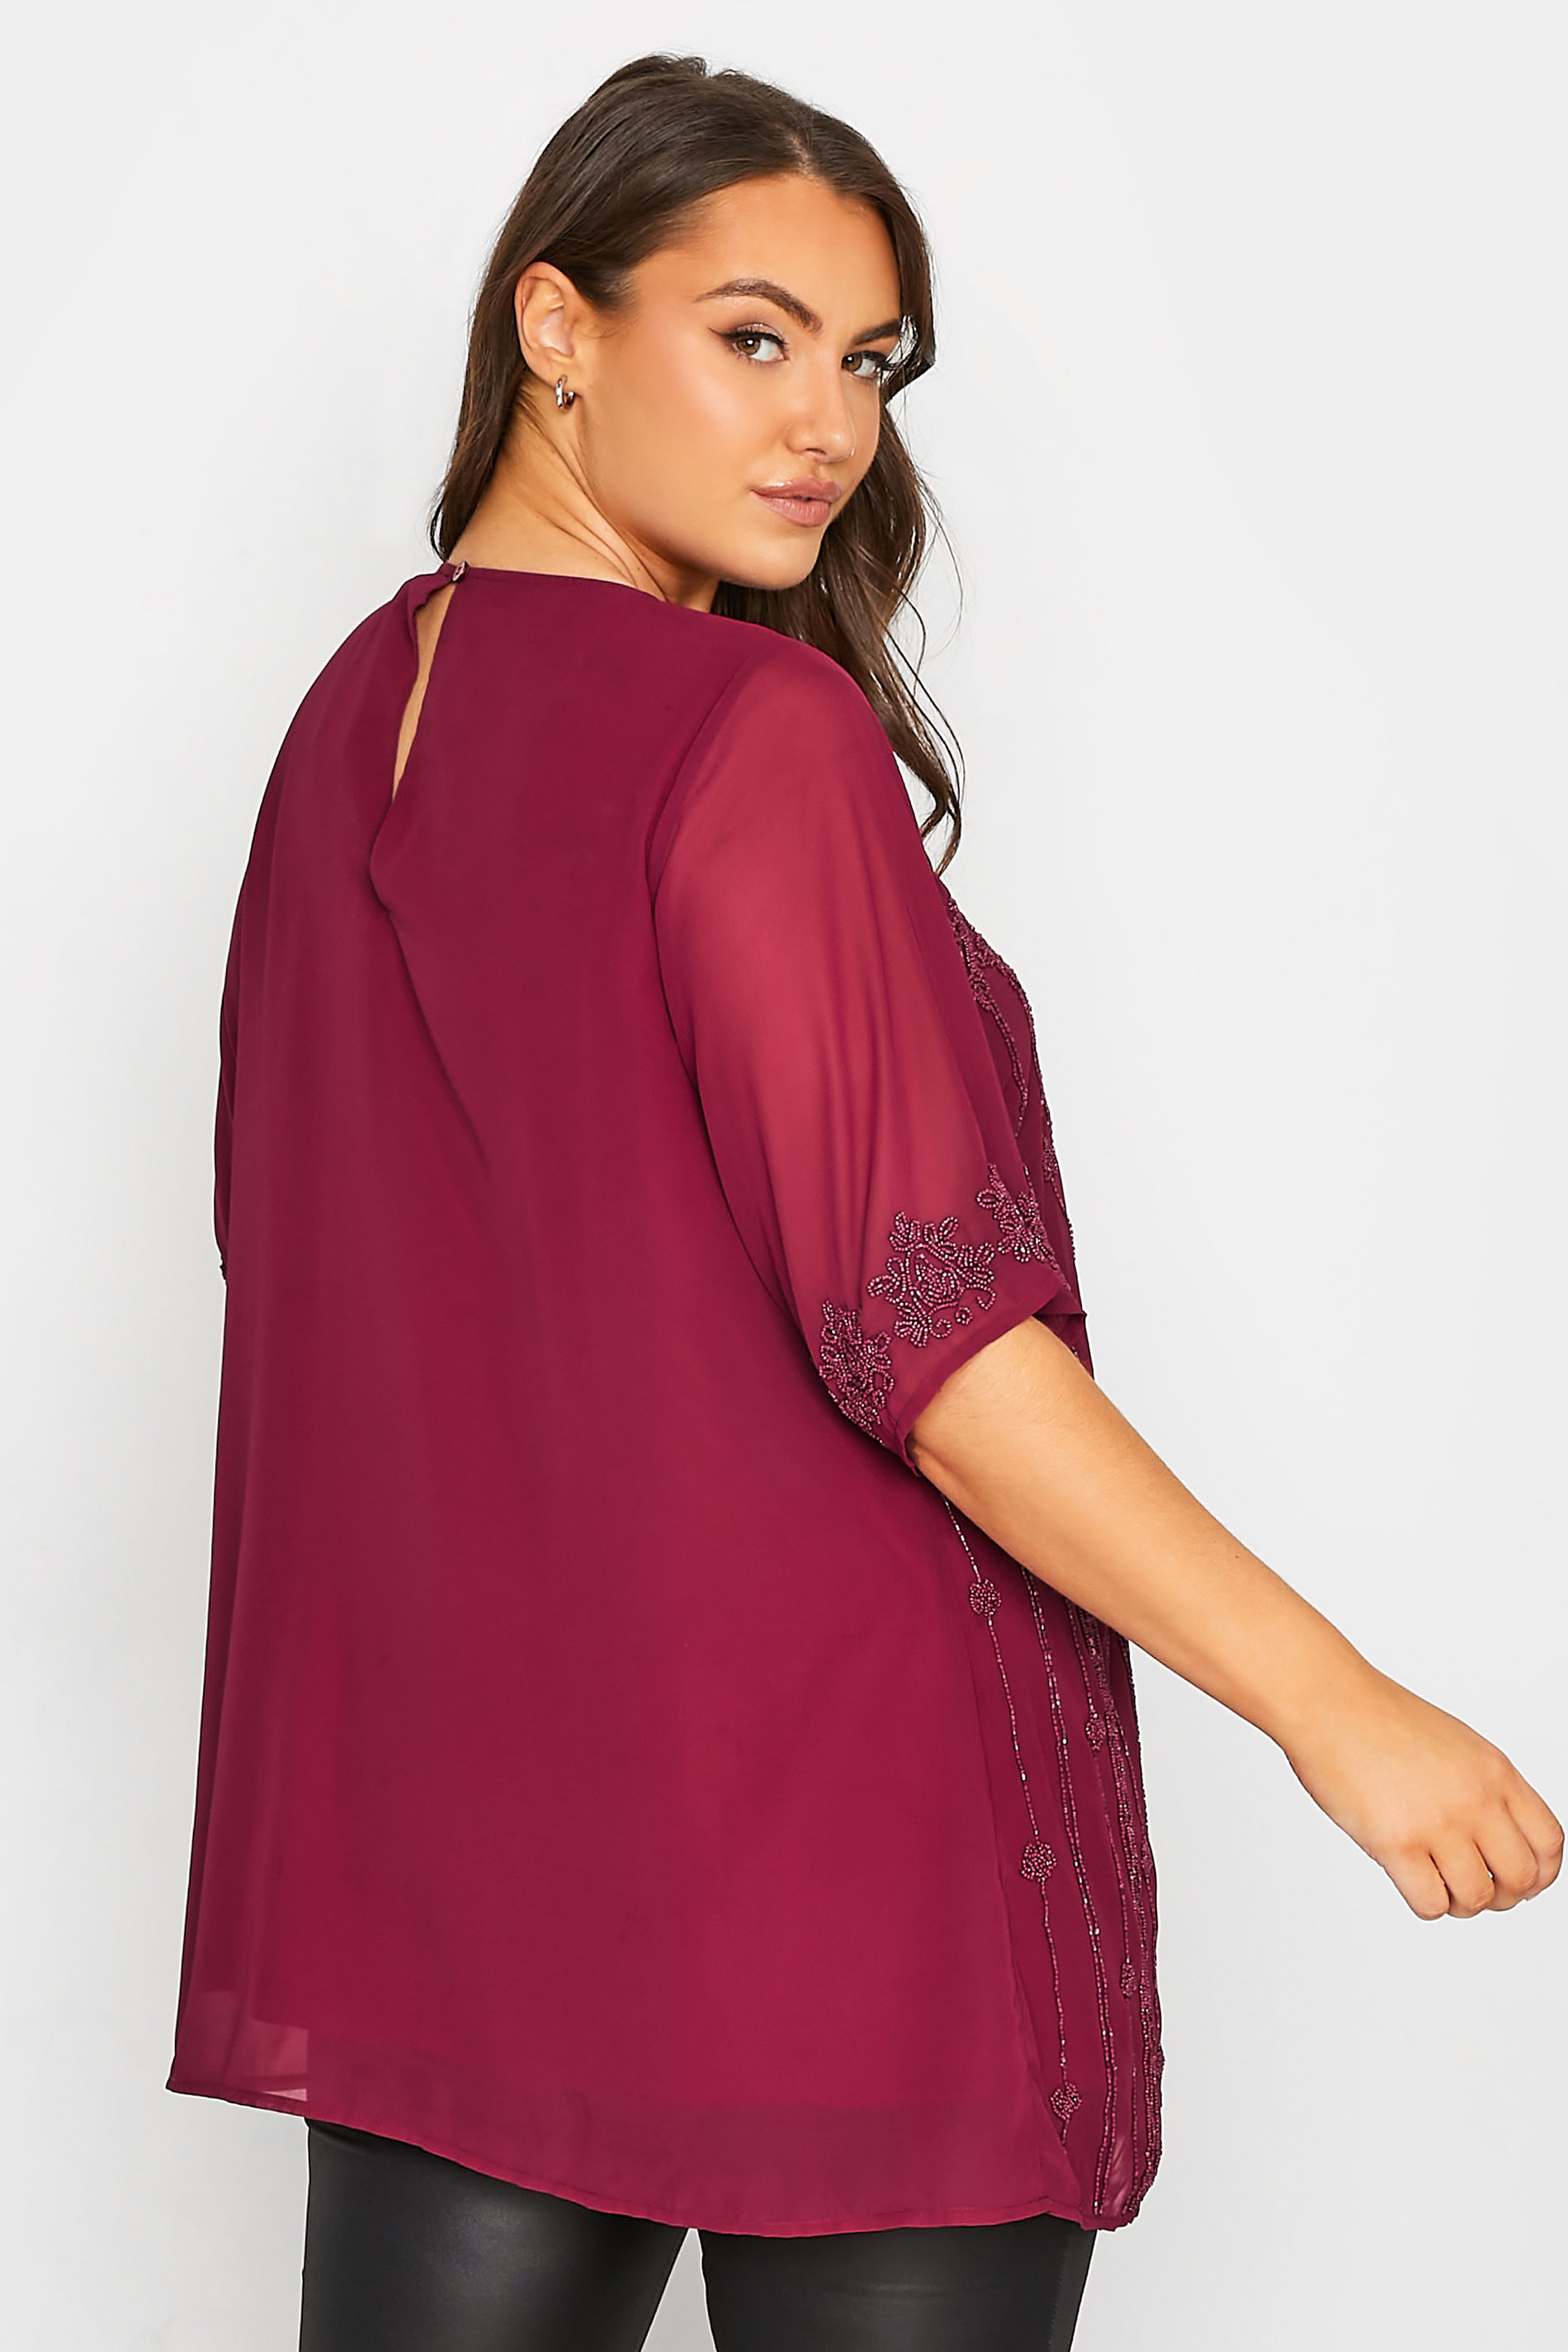 LUXE Plus Size Burgundy Red Sequin Hand Embellished Chiffon Blouse